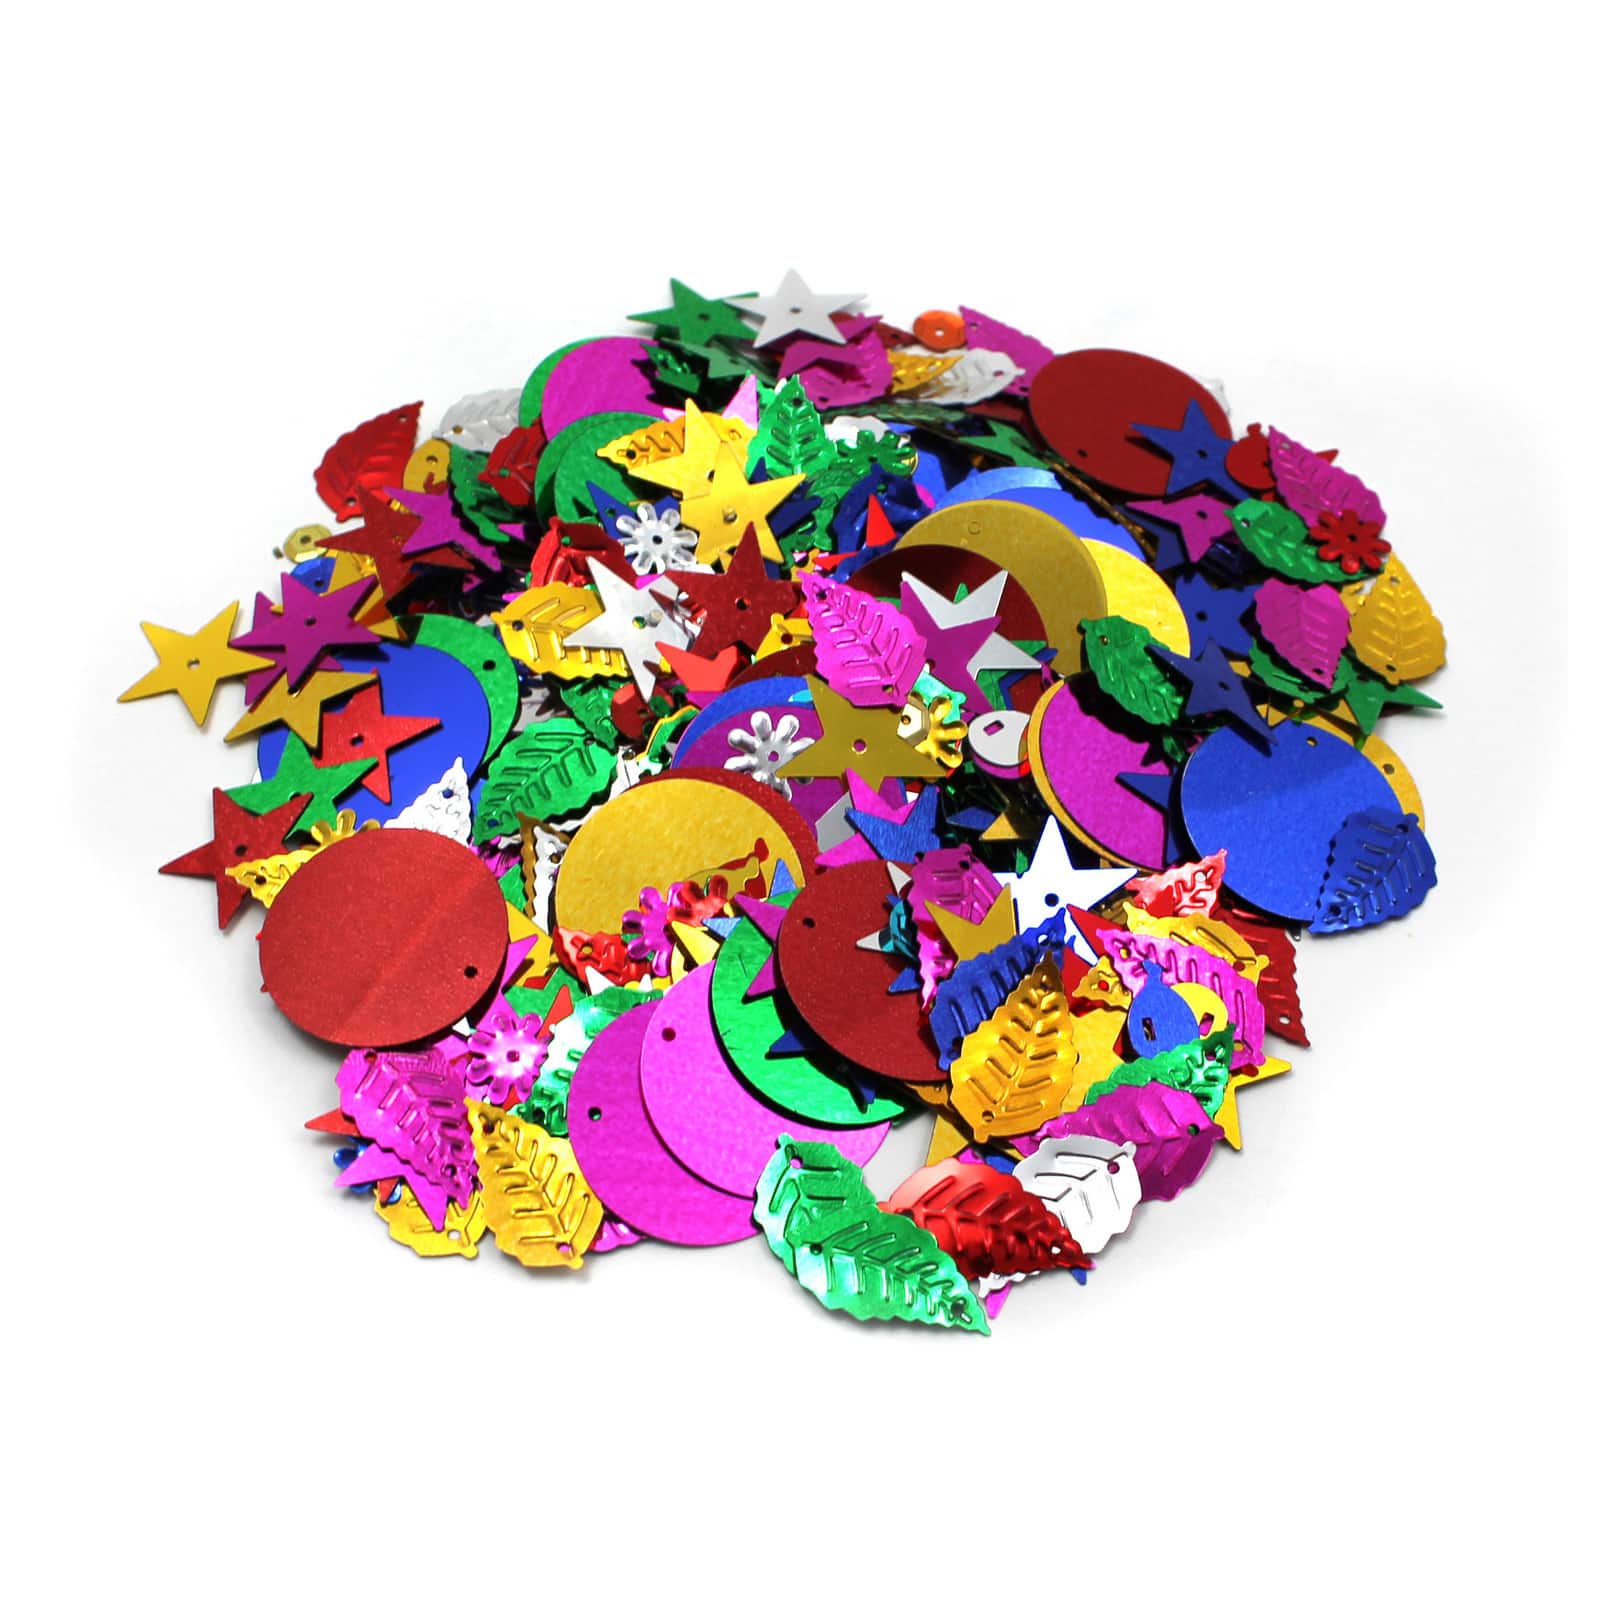 Charles Leonard Glittering Sequins with Spangles, 6 Packs of 4oz.